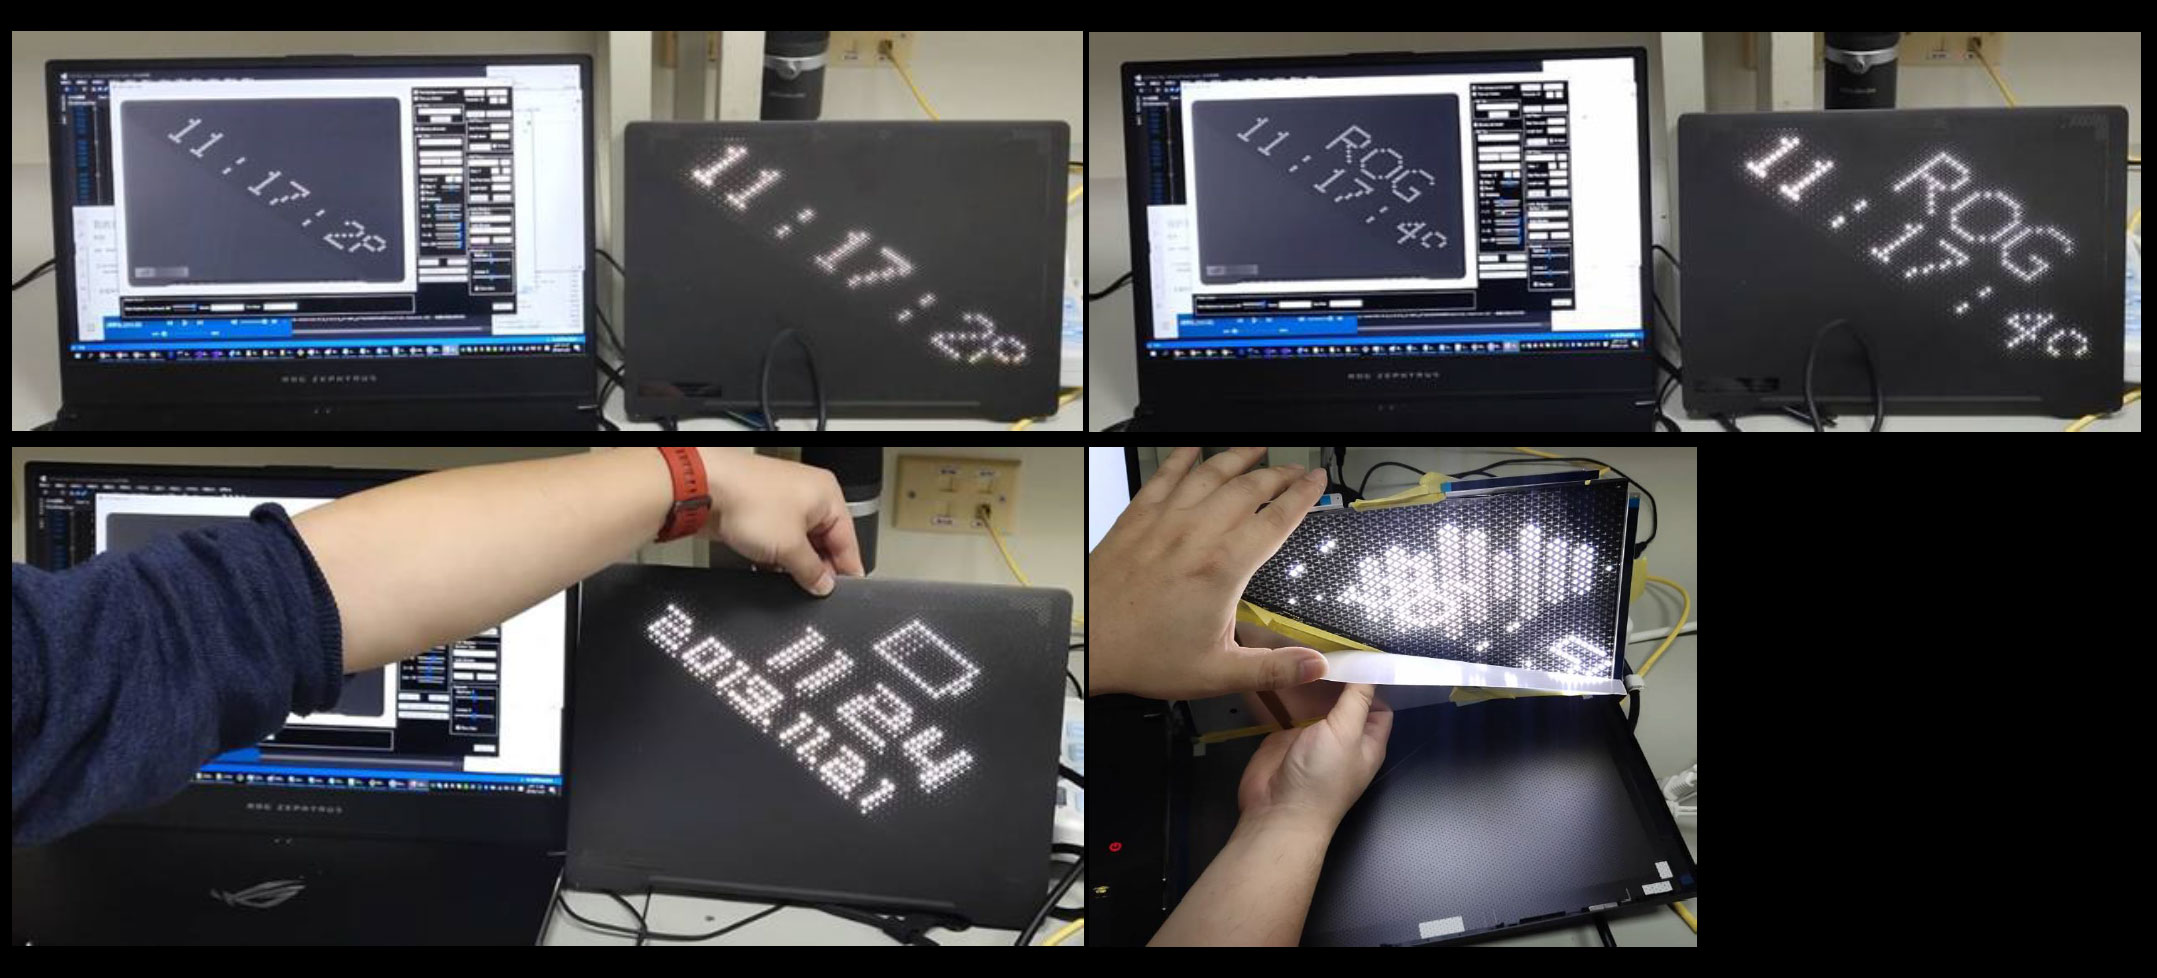 A preview of the AreaMatrix LED display